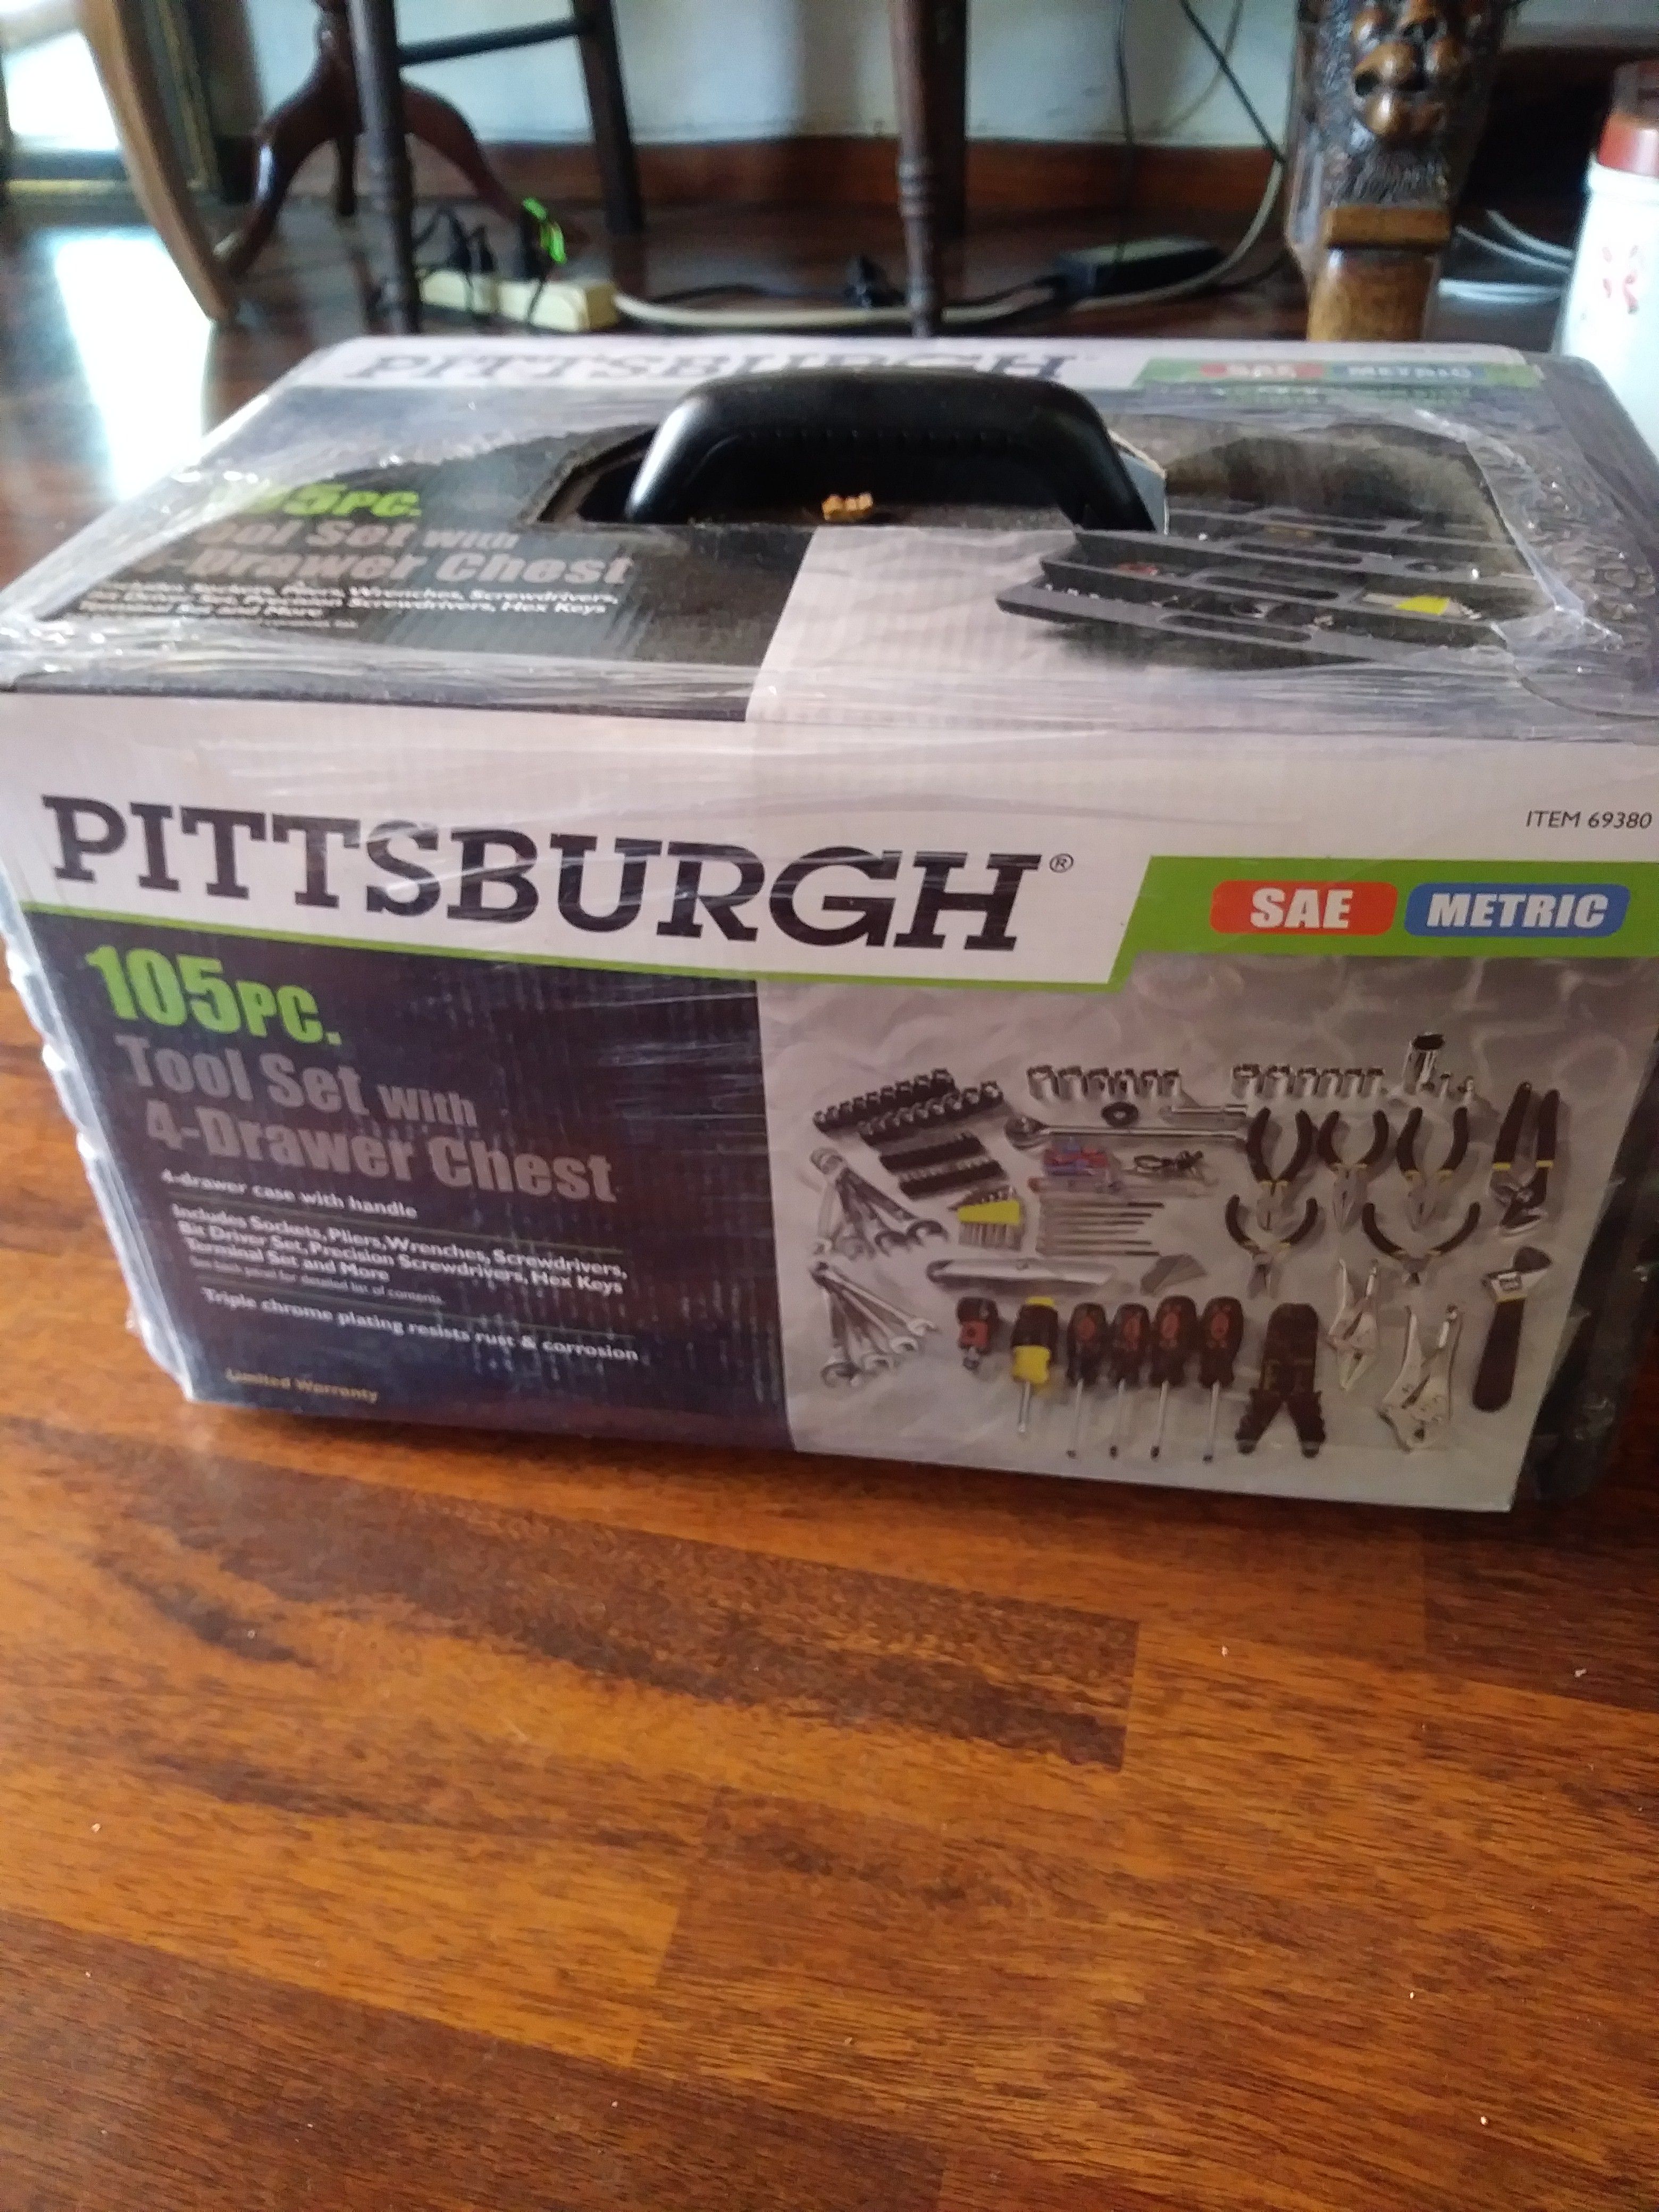 105 pc. PITTSBURGH Tool set with 4-drawer chest for Sale in San Diego, CA  OfferUp